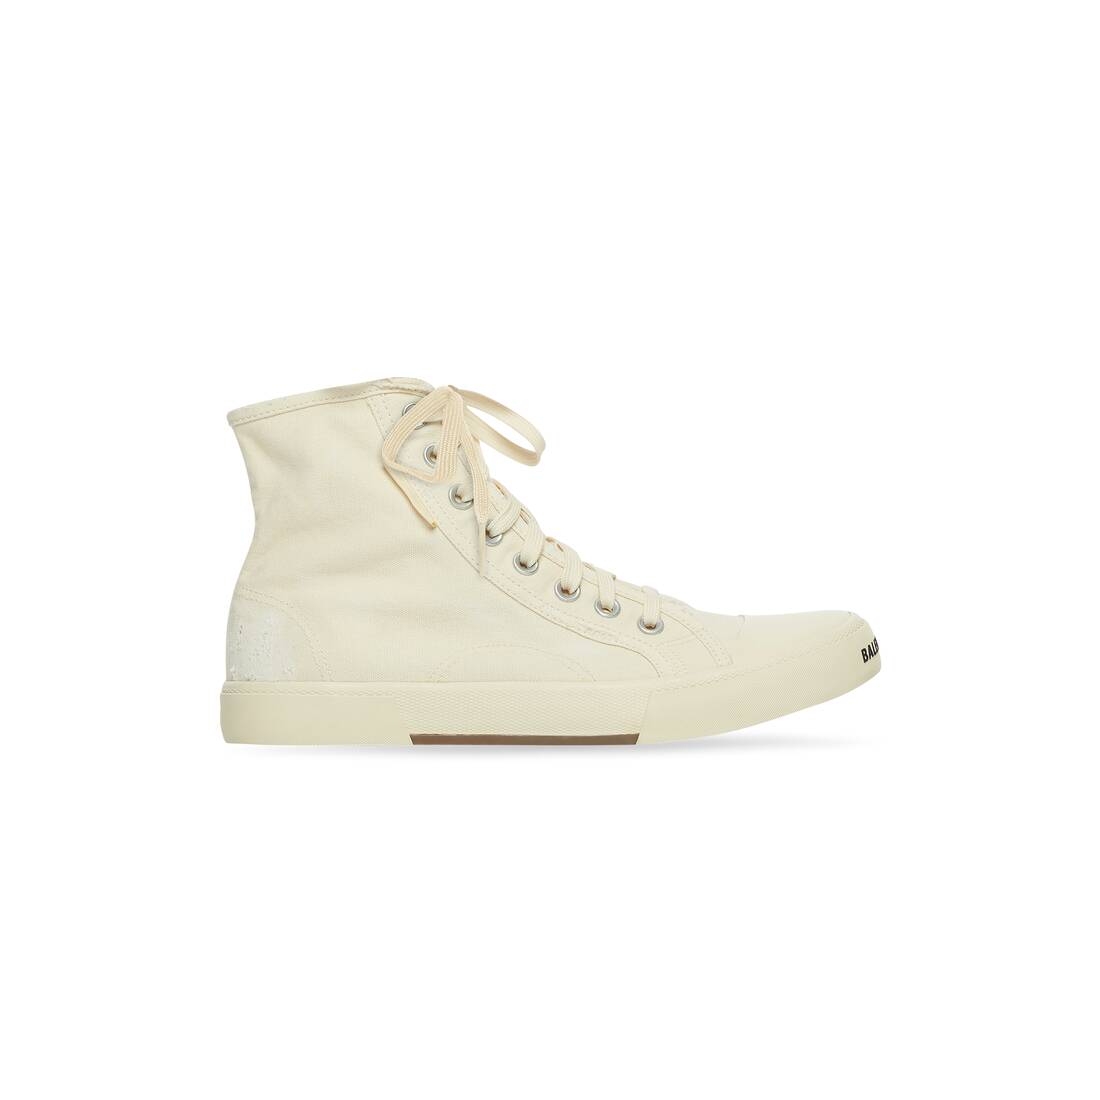 Paris High Top Sneaker in white destroyed cotton and white rubber